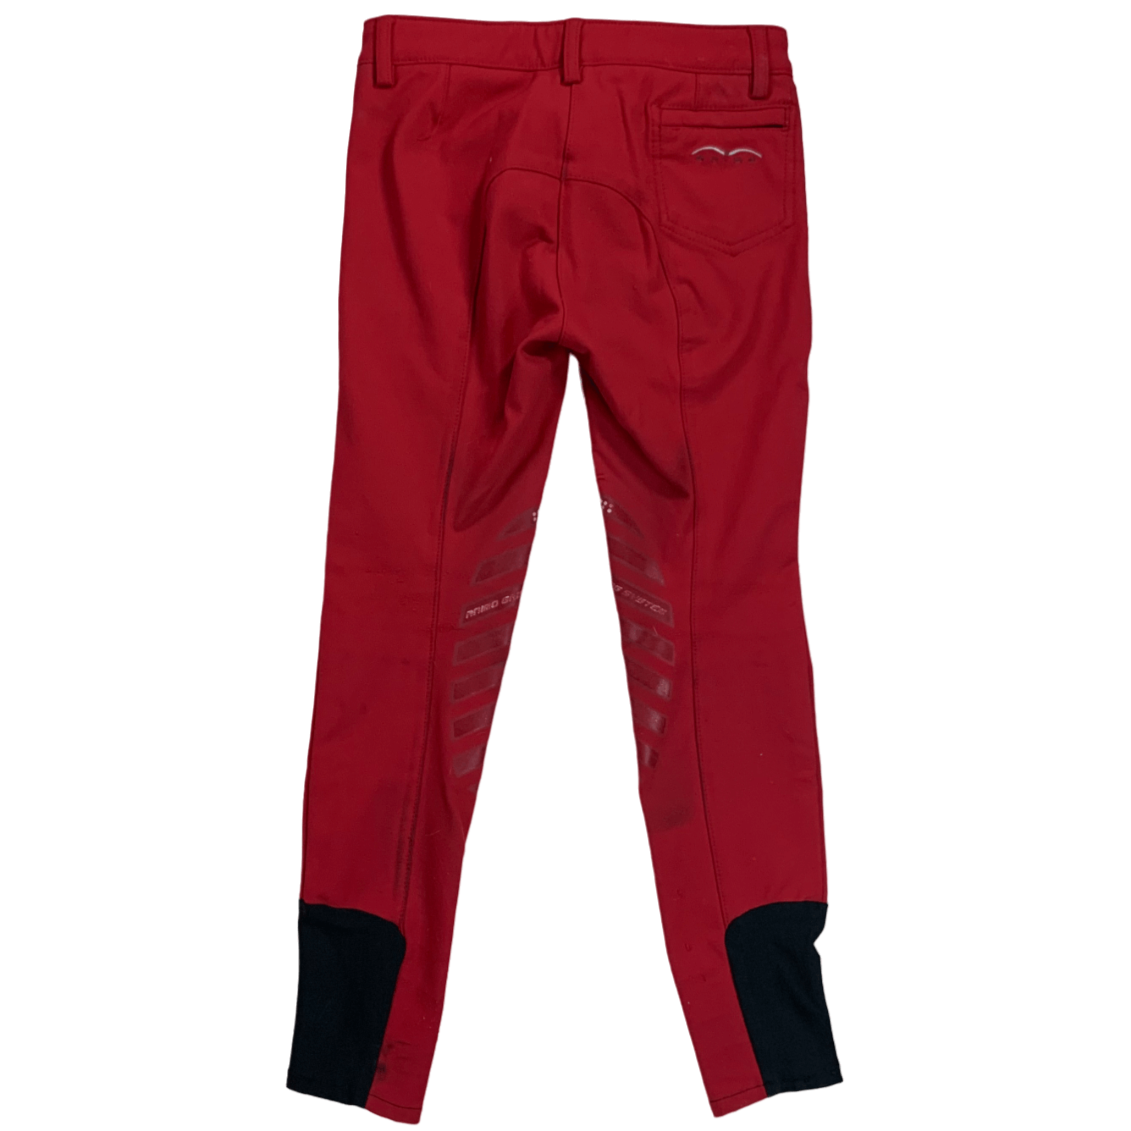 Animo Pony Division Breeches in Red - Youth 8